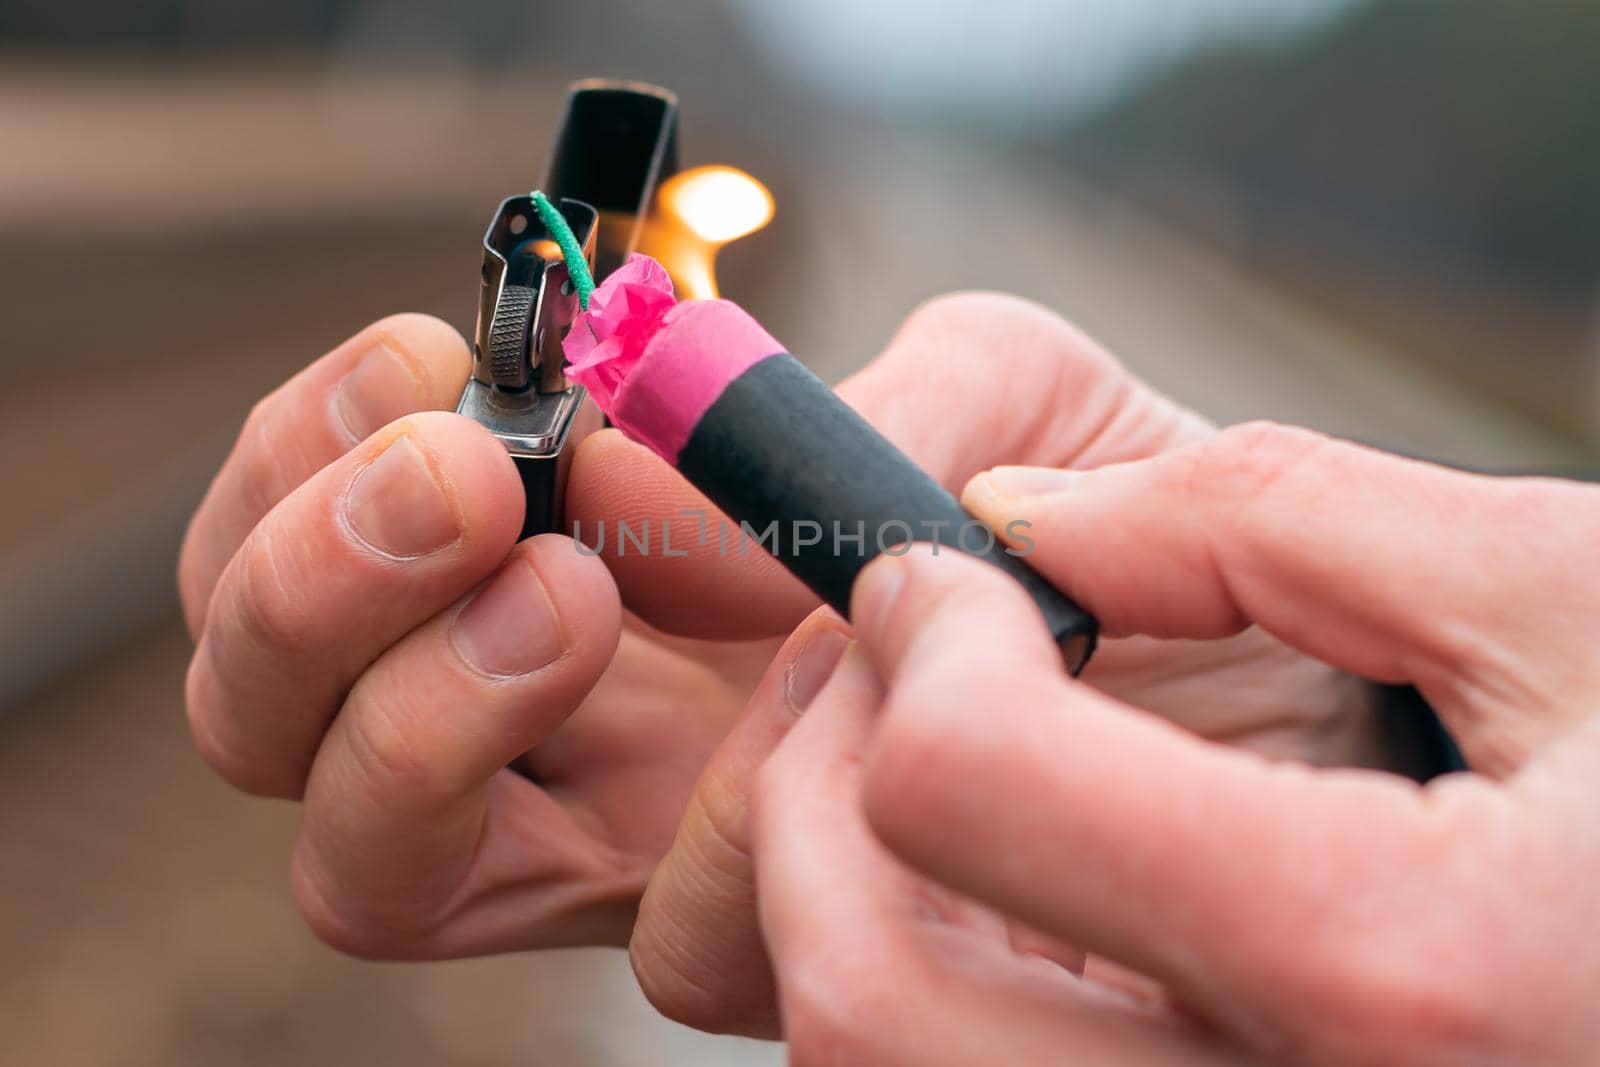 Setting Fire to the Firecracker. Man in Black Clothes Lighting Up the Petard. Firing Up the Pyrotechnics with a Black Gasoline Lighter Outdoors